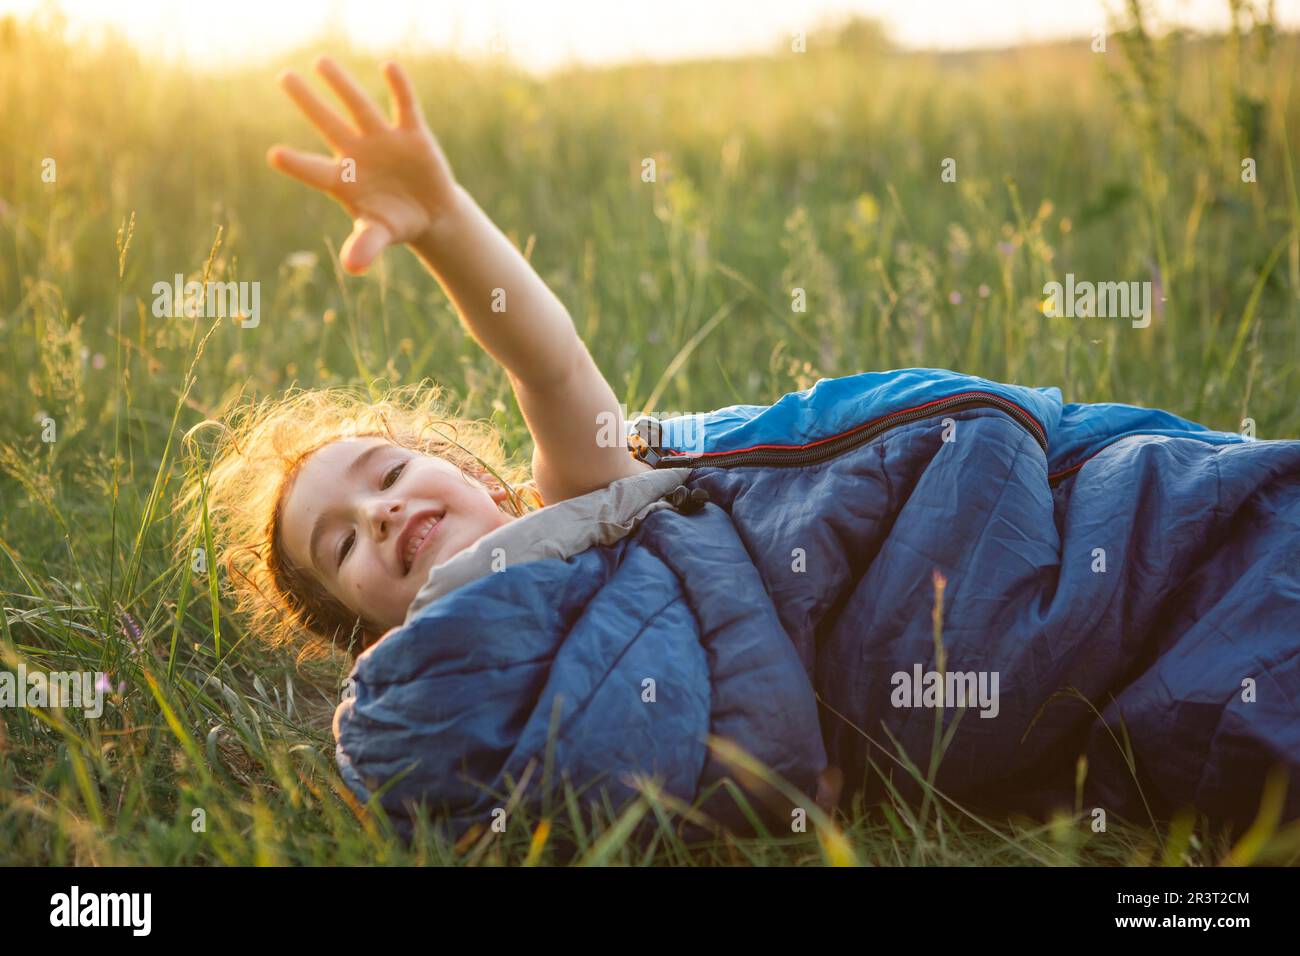 A child sleeps in a sleeping bag on the grass in a camping trip - eco-friendly outdoor recreation, healthy lifestyle, summer tim Stock Photo